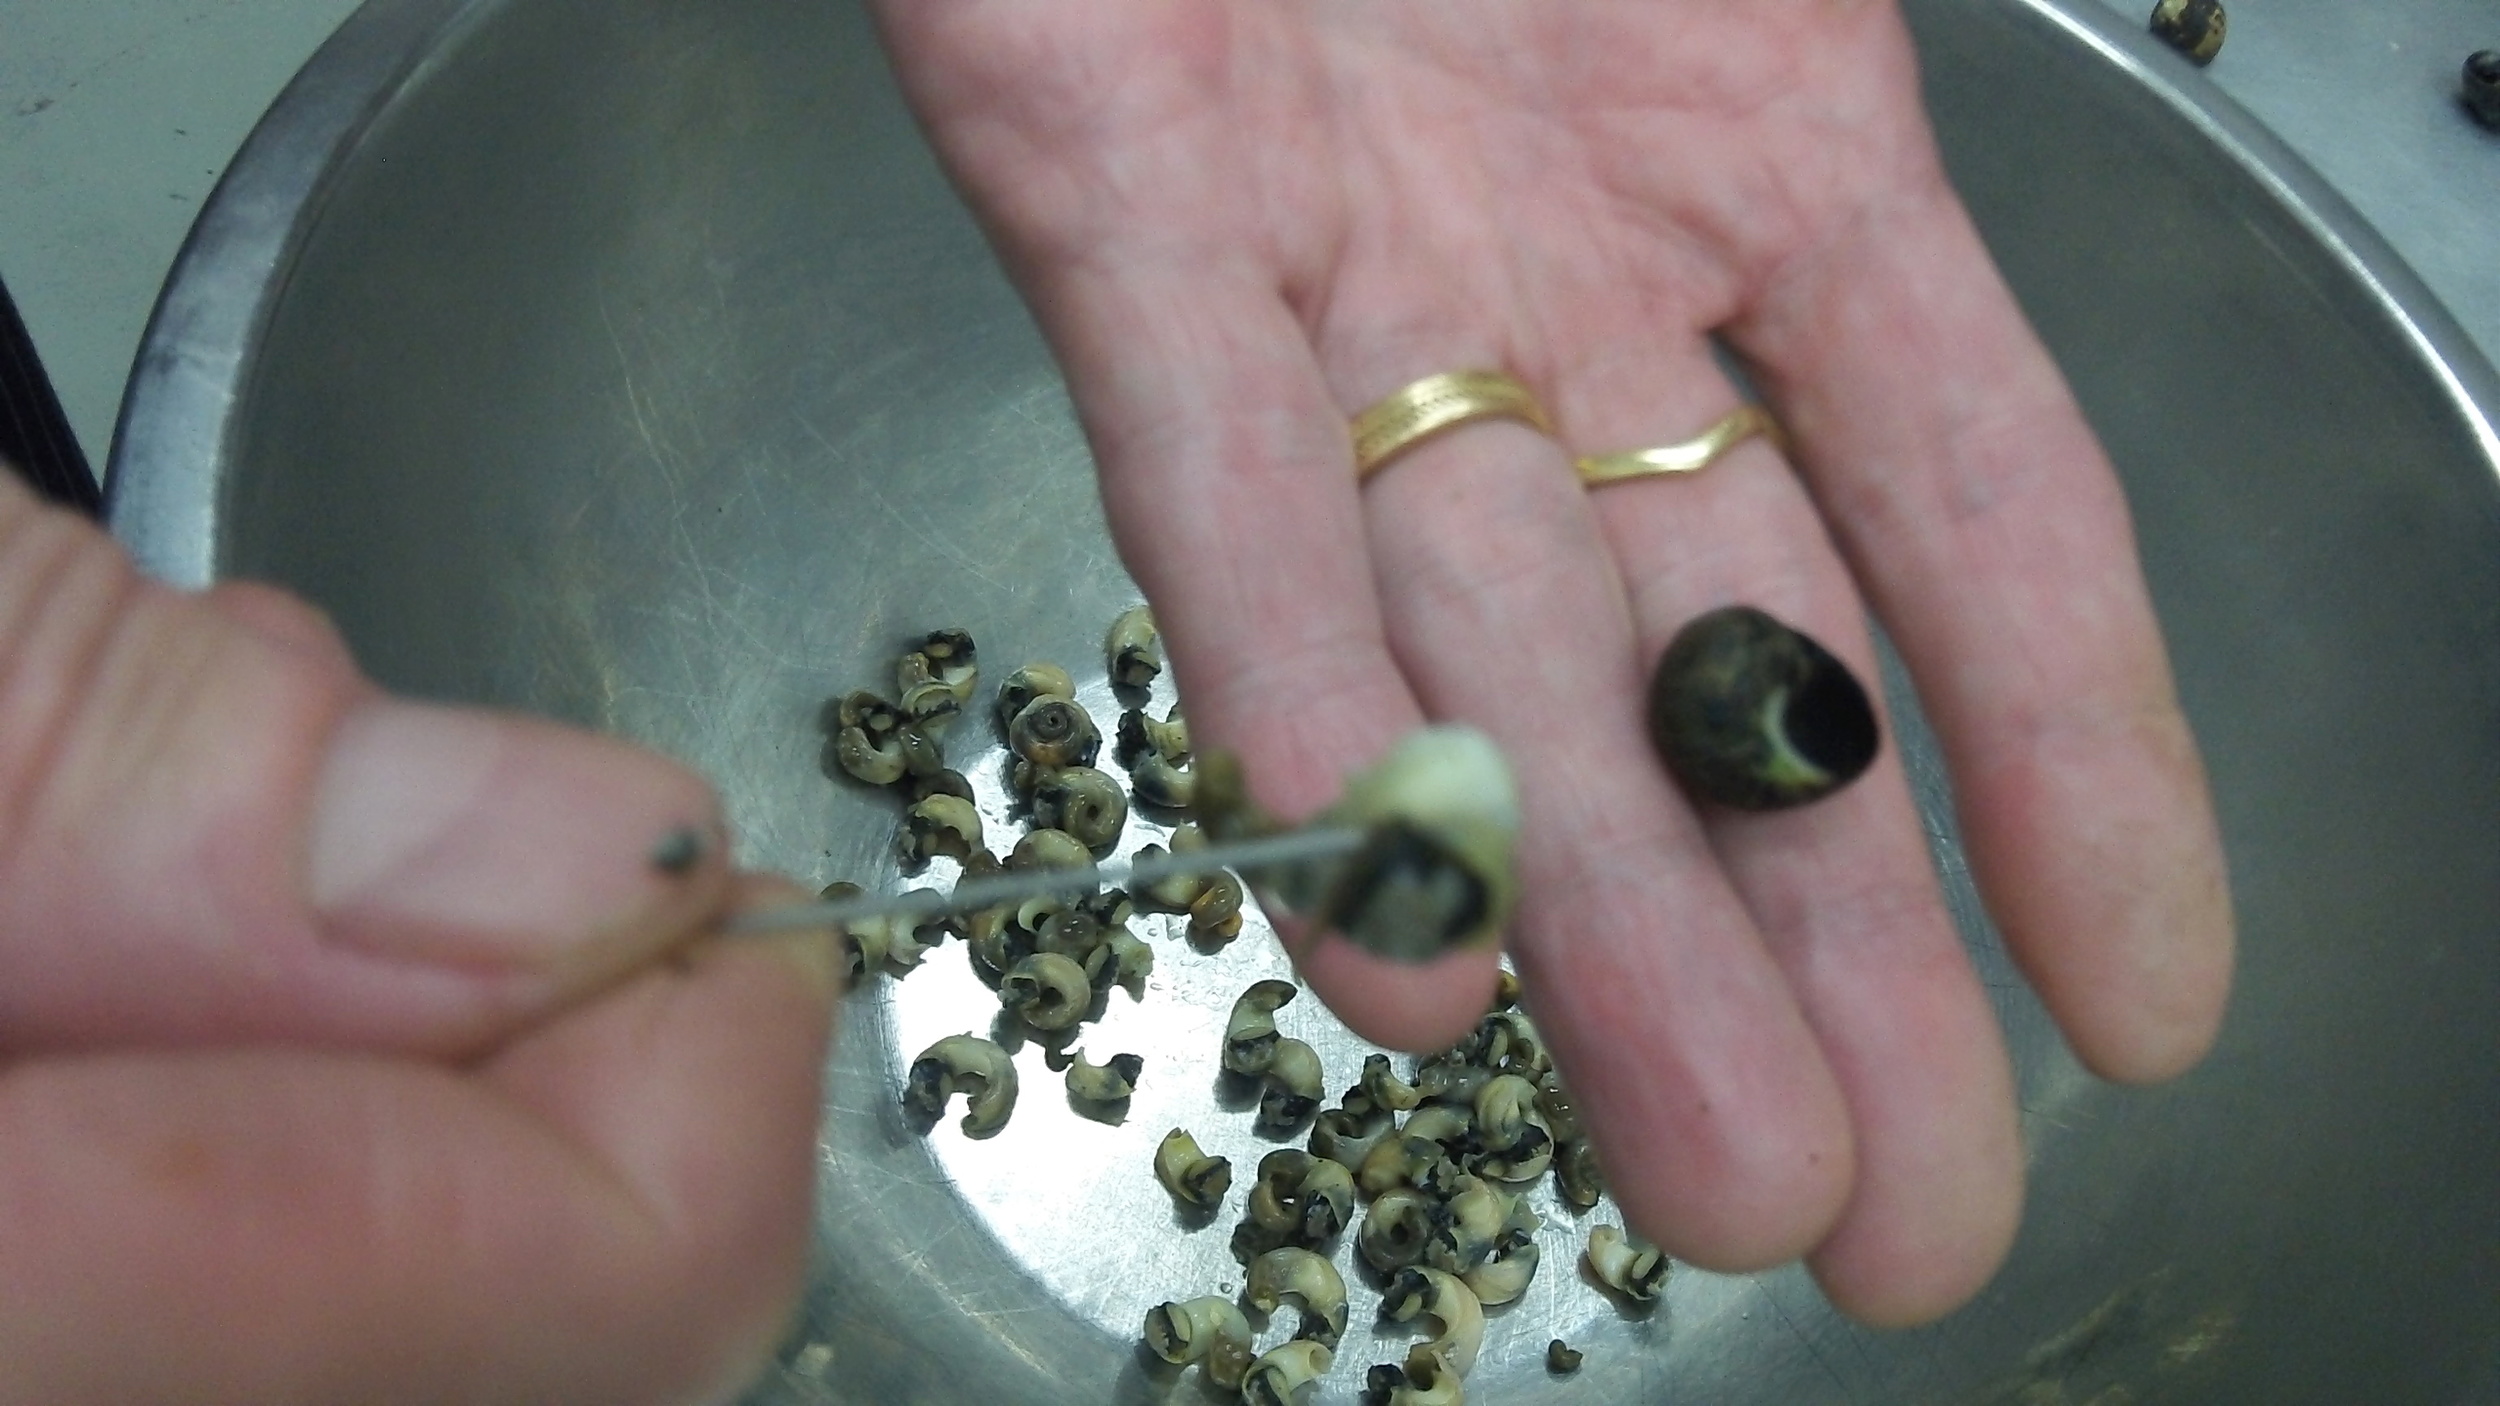 Removing periwinkles from their shells